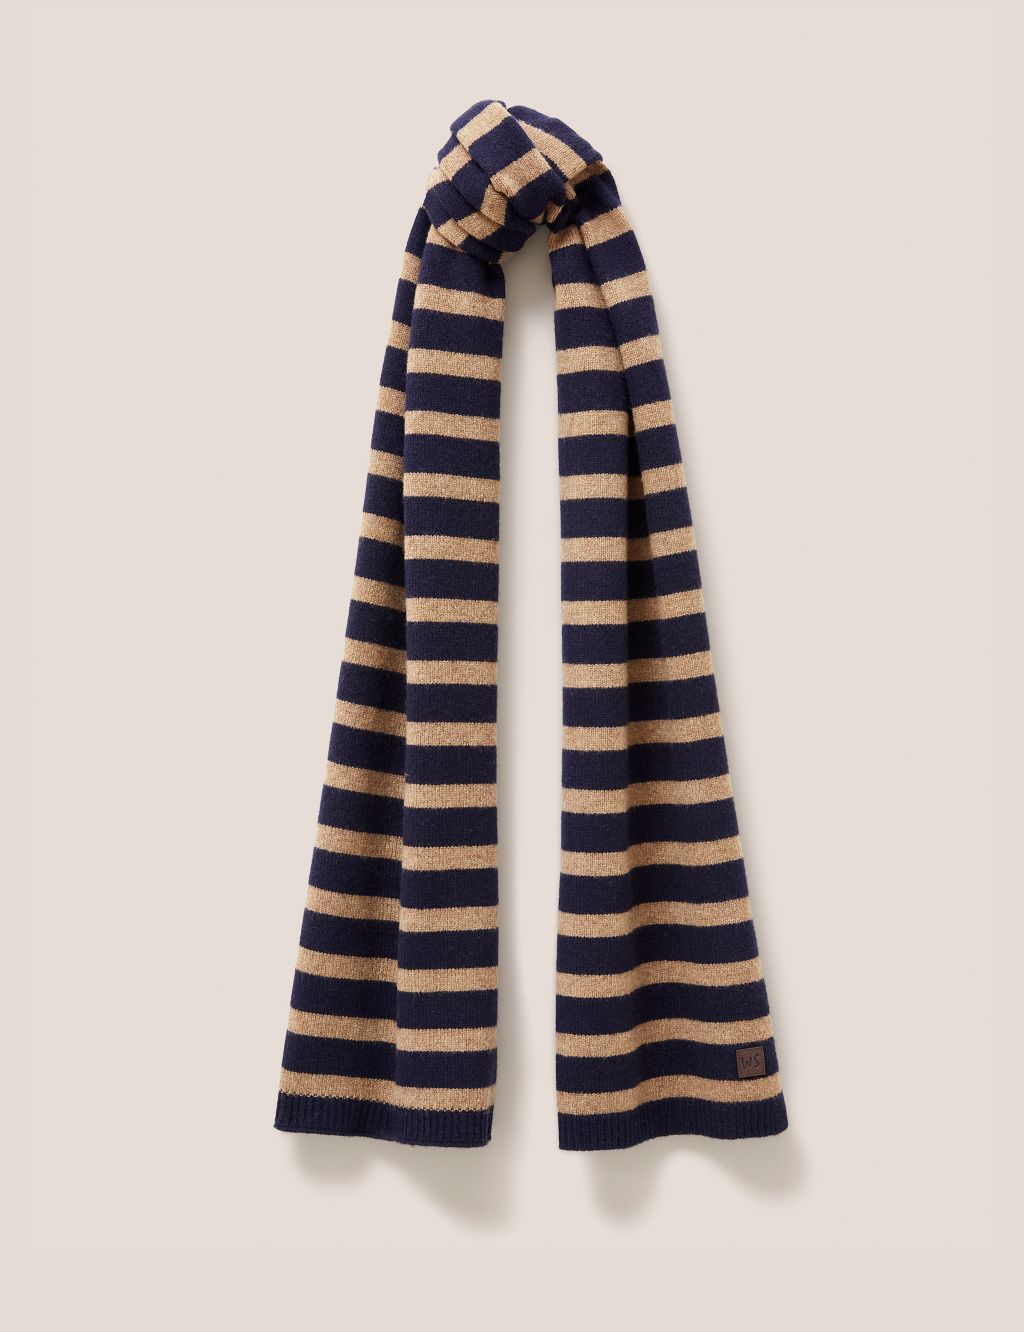 Wool Rich Striped Knitted Scarf image 1